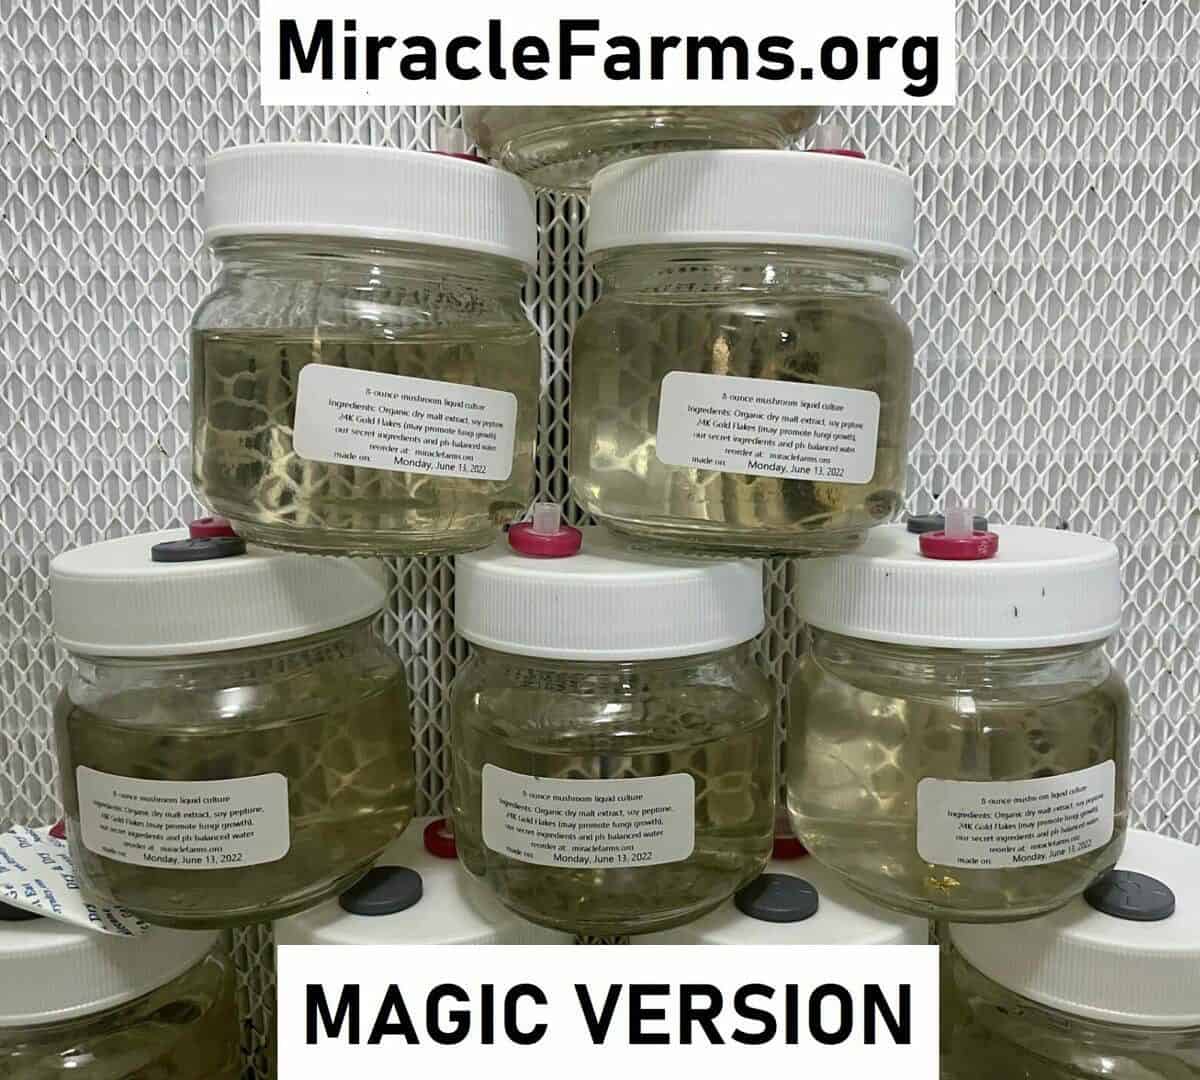 8oz Liquid Mushroom Culture jars with 24K gold infused nutrient broth designed specifically for cubes or magic mushroom strains made by hand sold only at miracle farms dot org IMG 2677